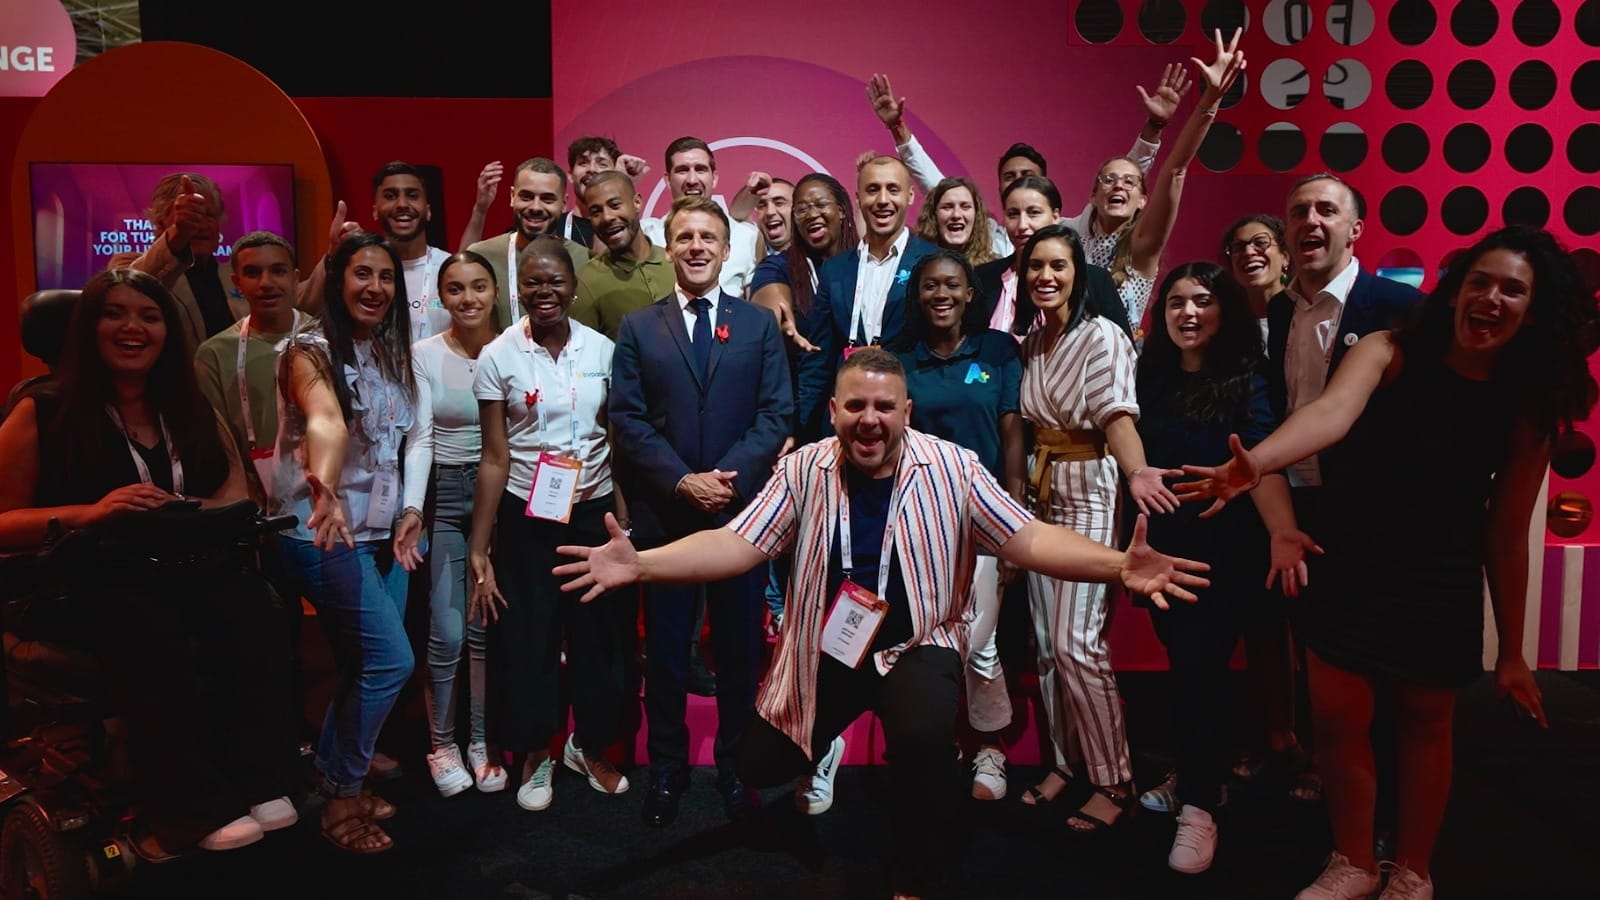 Babkine (center) with President Emmanuel Macron to his left during a visit to the Viva Tech Diversidays stage.